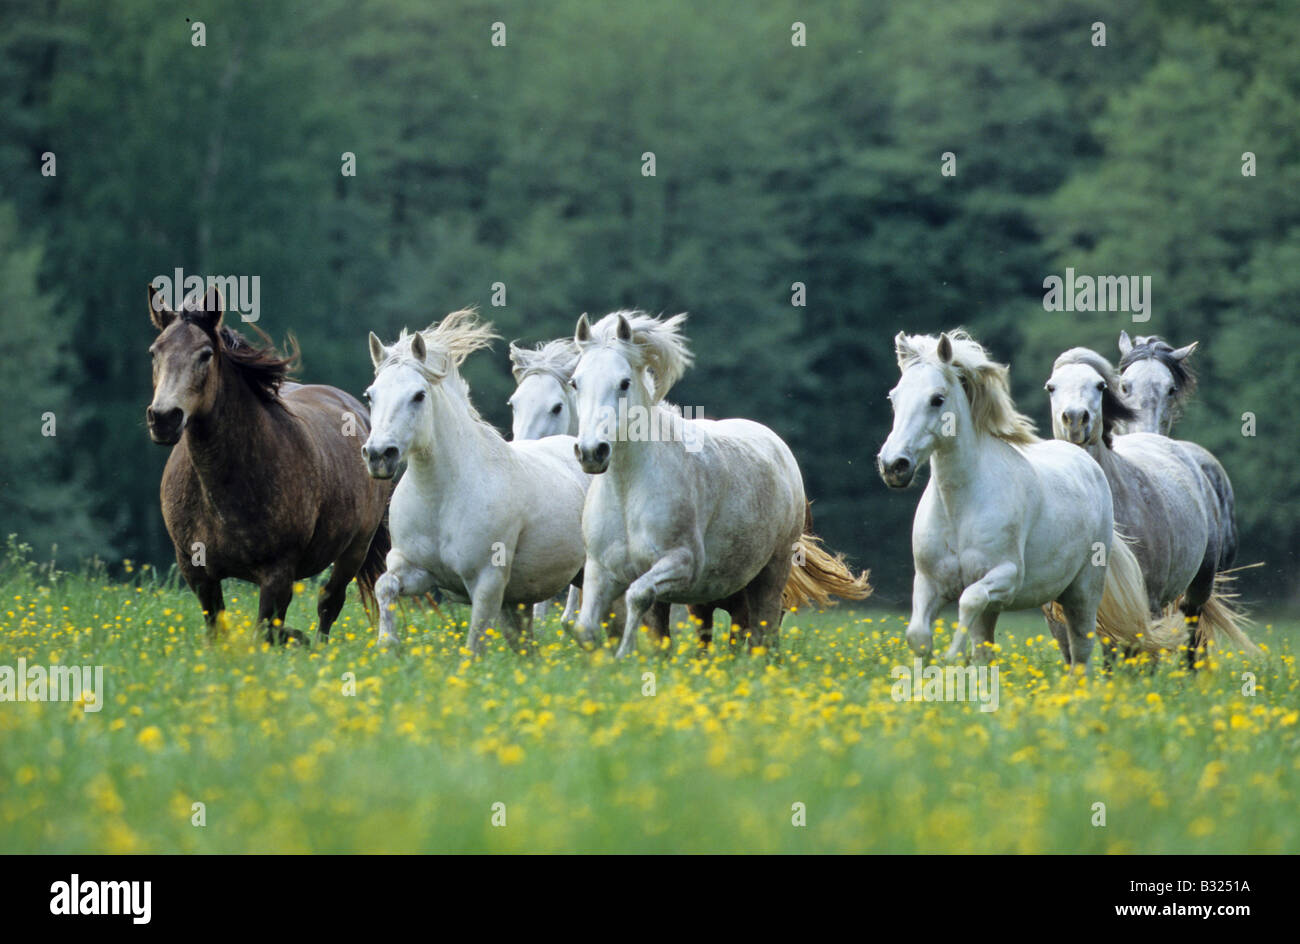 Connemara Pony (Equus caballus), herd in gallop on a meadow Stock Photo